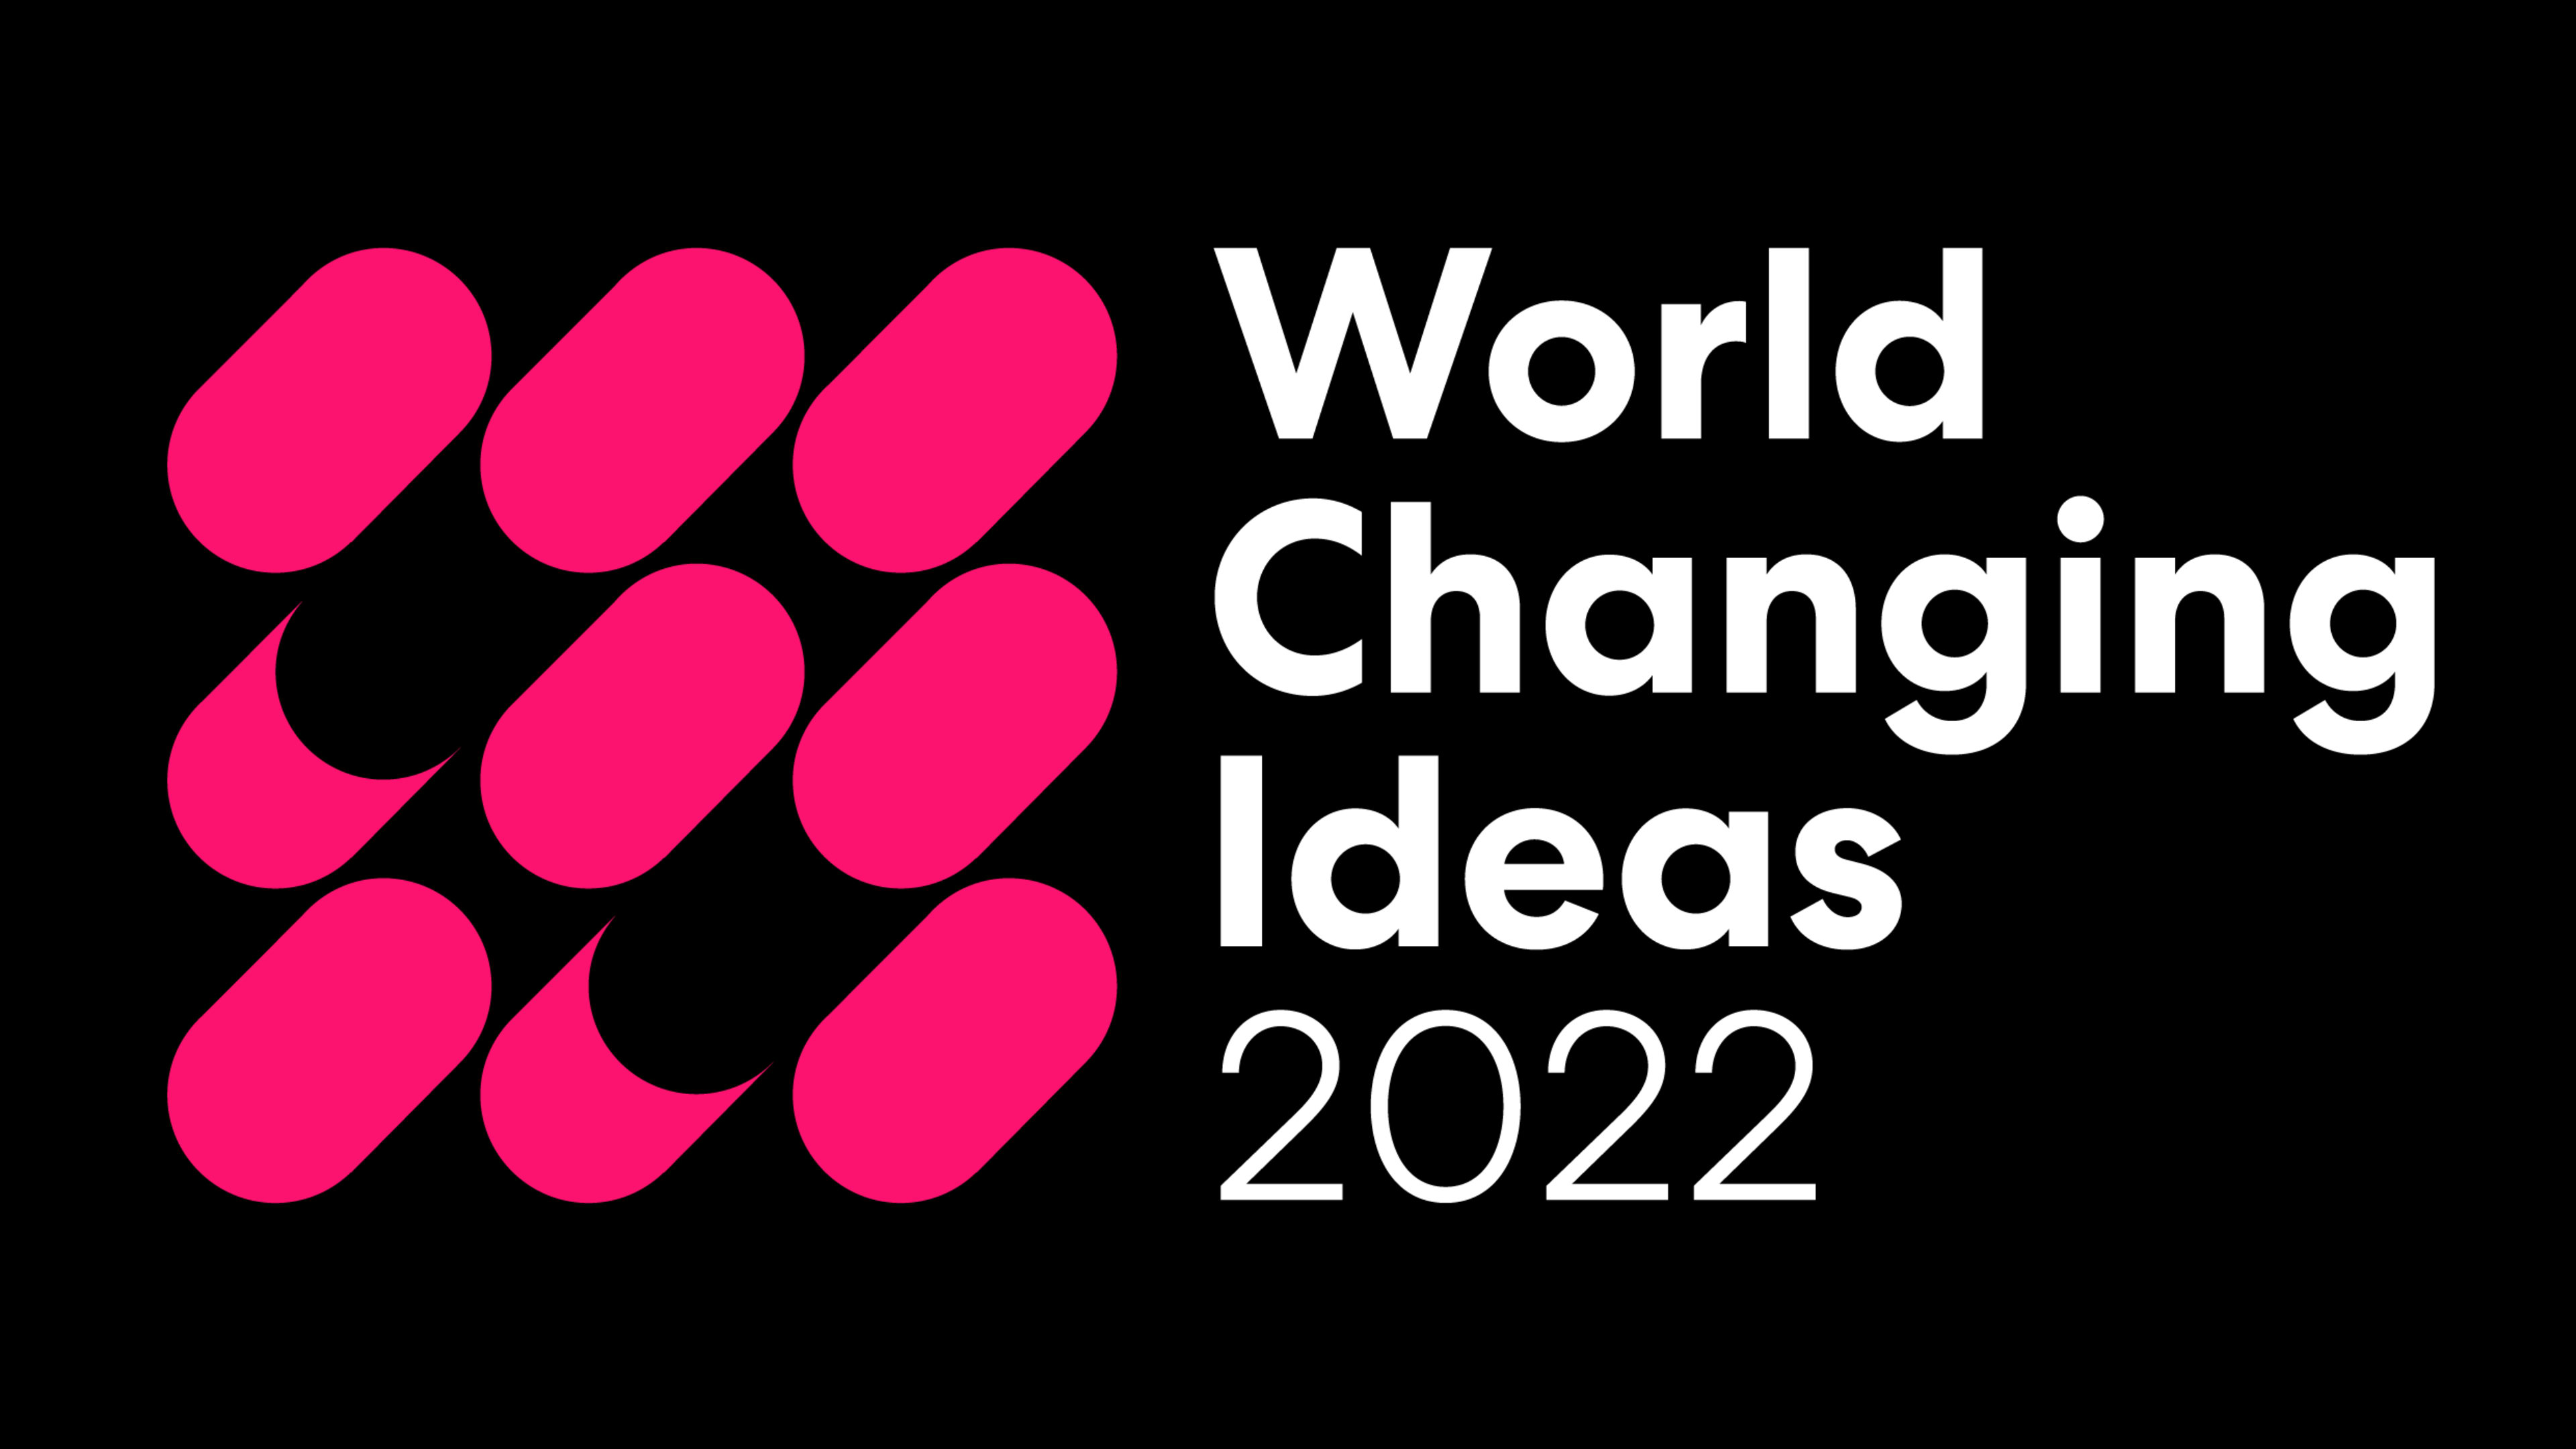 5 reasons to enter Fast Company’s 2022 World Changing Ideas Awards